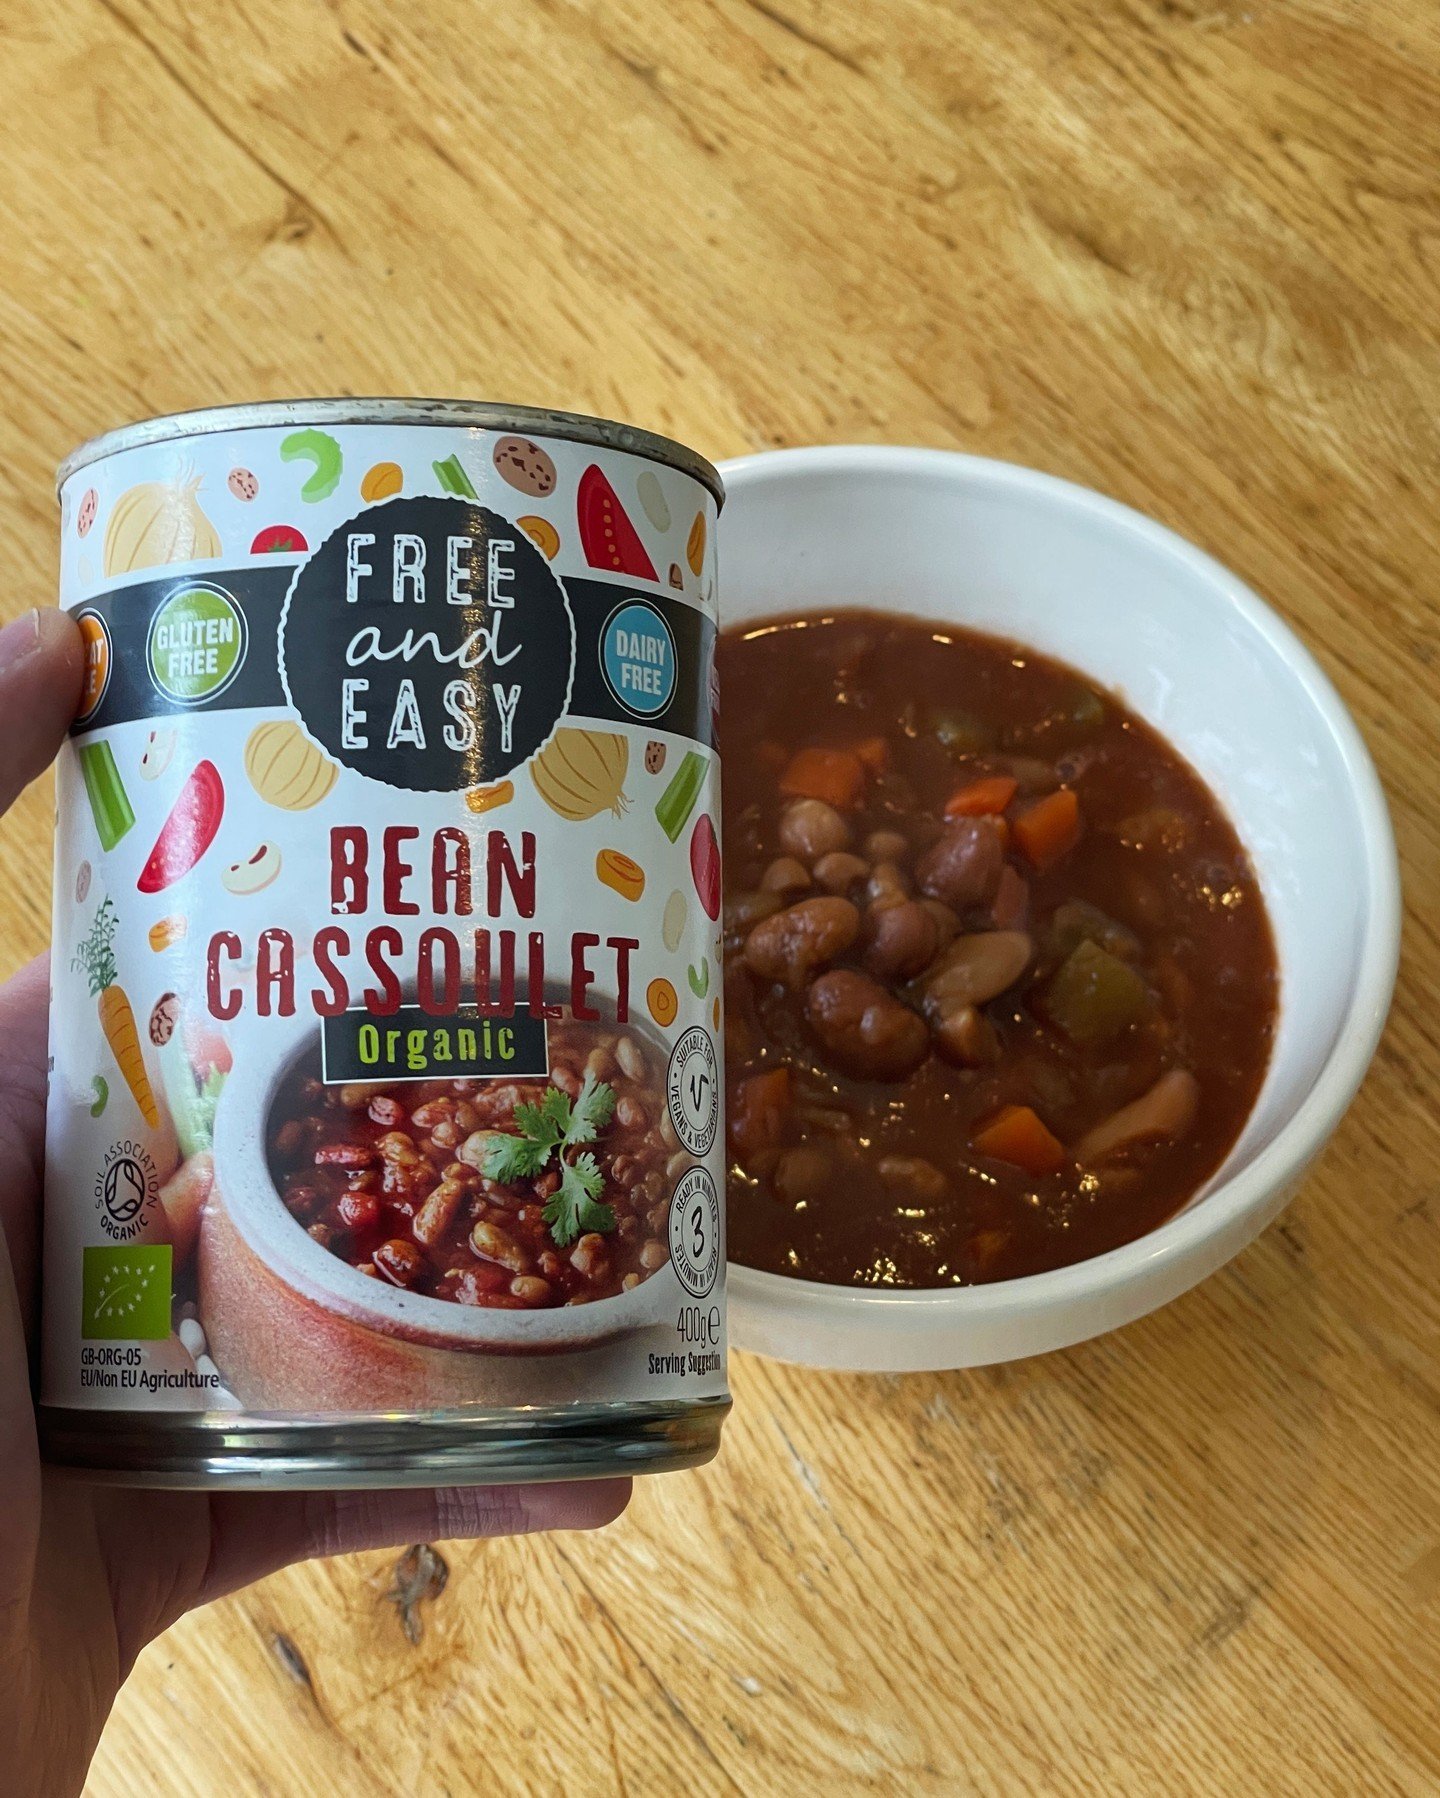 A rich tomato sauce, paired with a variety of beans, carrots and celery to make a quick, easy and healthy lunch 🍅

Our bean cassoulet is a fantastic 'grab-and-go' meal, only taking a few minutes to heat, and delicious served on it's own 😋